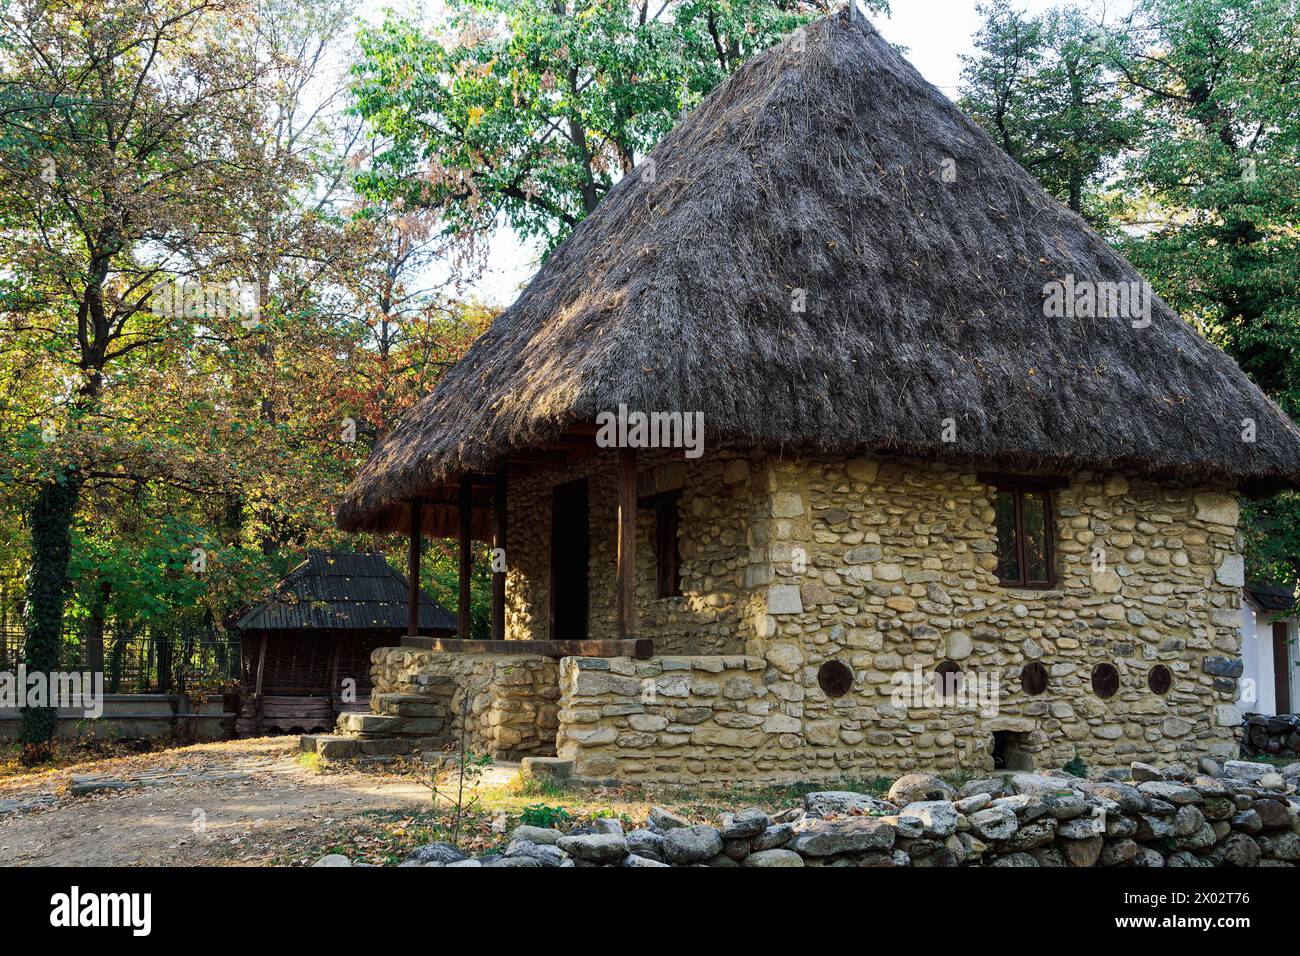 Authentic peasant settlements exhibiting traditional Romanian village life inside Dimitrie Gusti National Village Museum, Bucharest, Romania, Europe Stock Photo